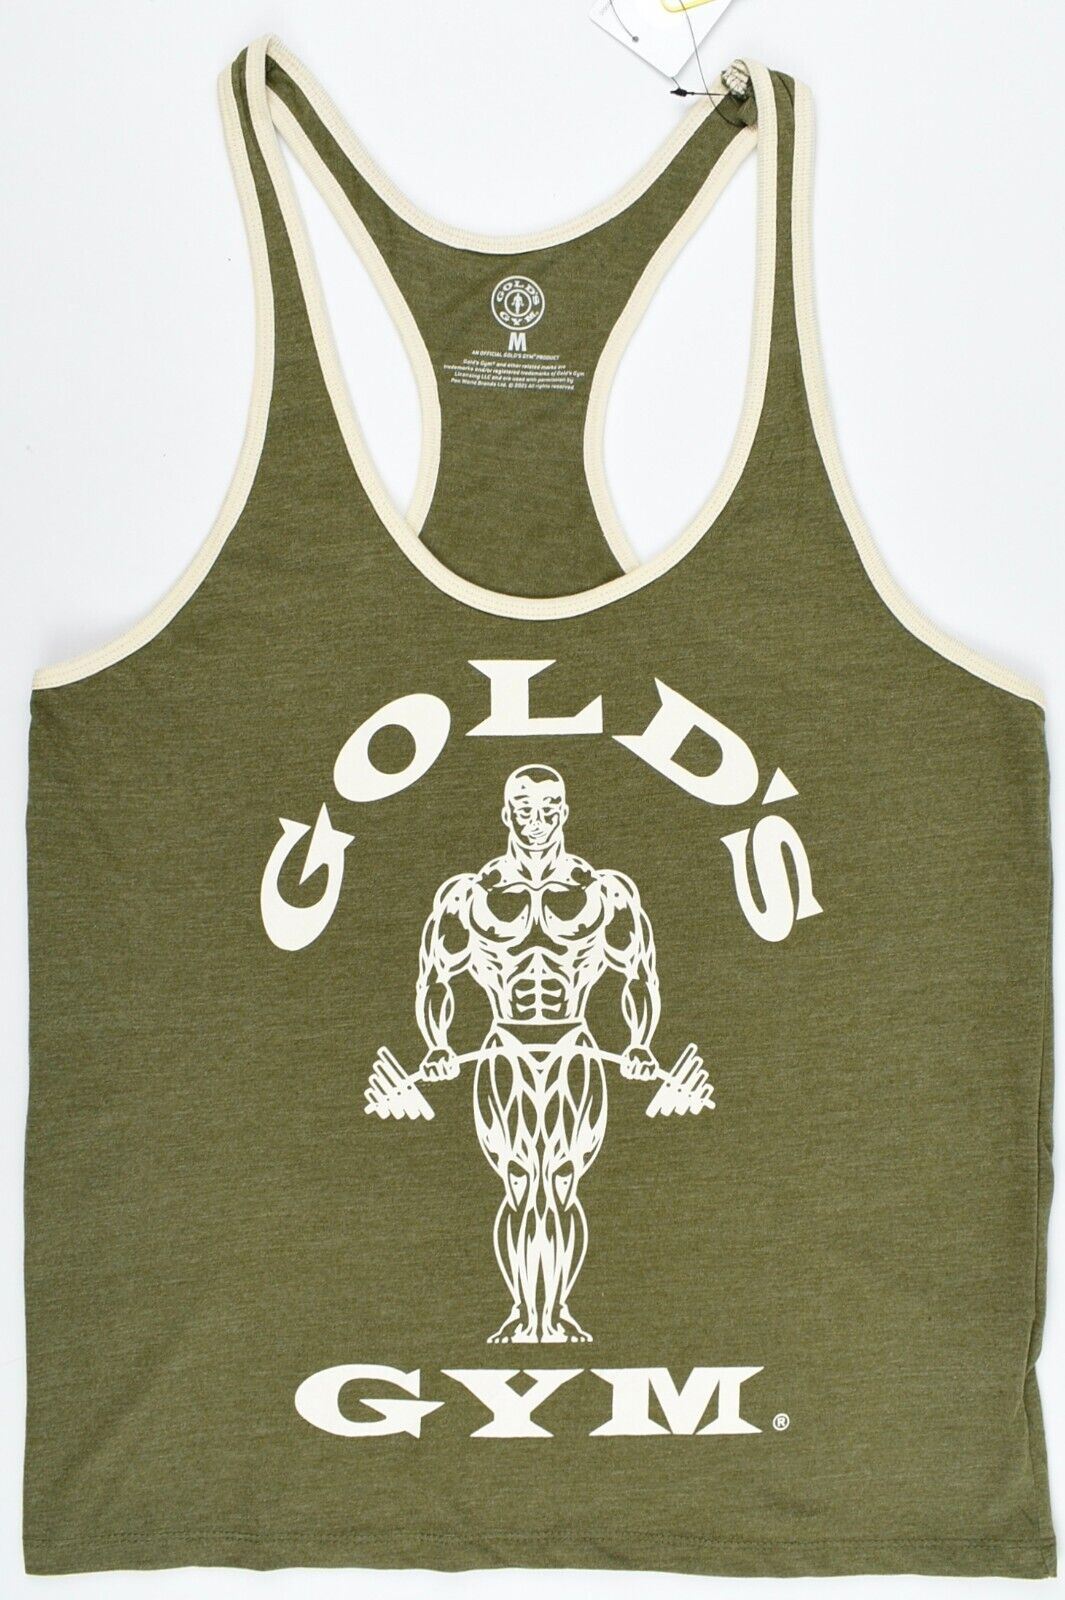 GOLD'S GYM Core Collection Men's MUSCLE JOE Vest Top, Army Green, size XL